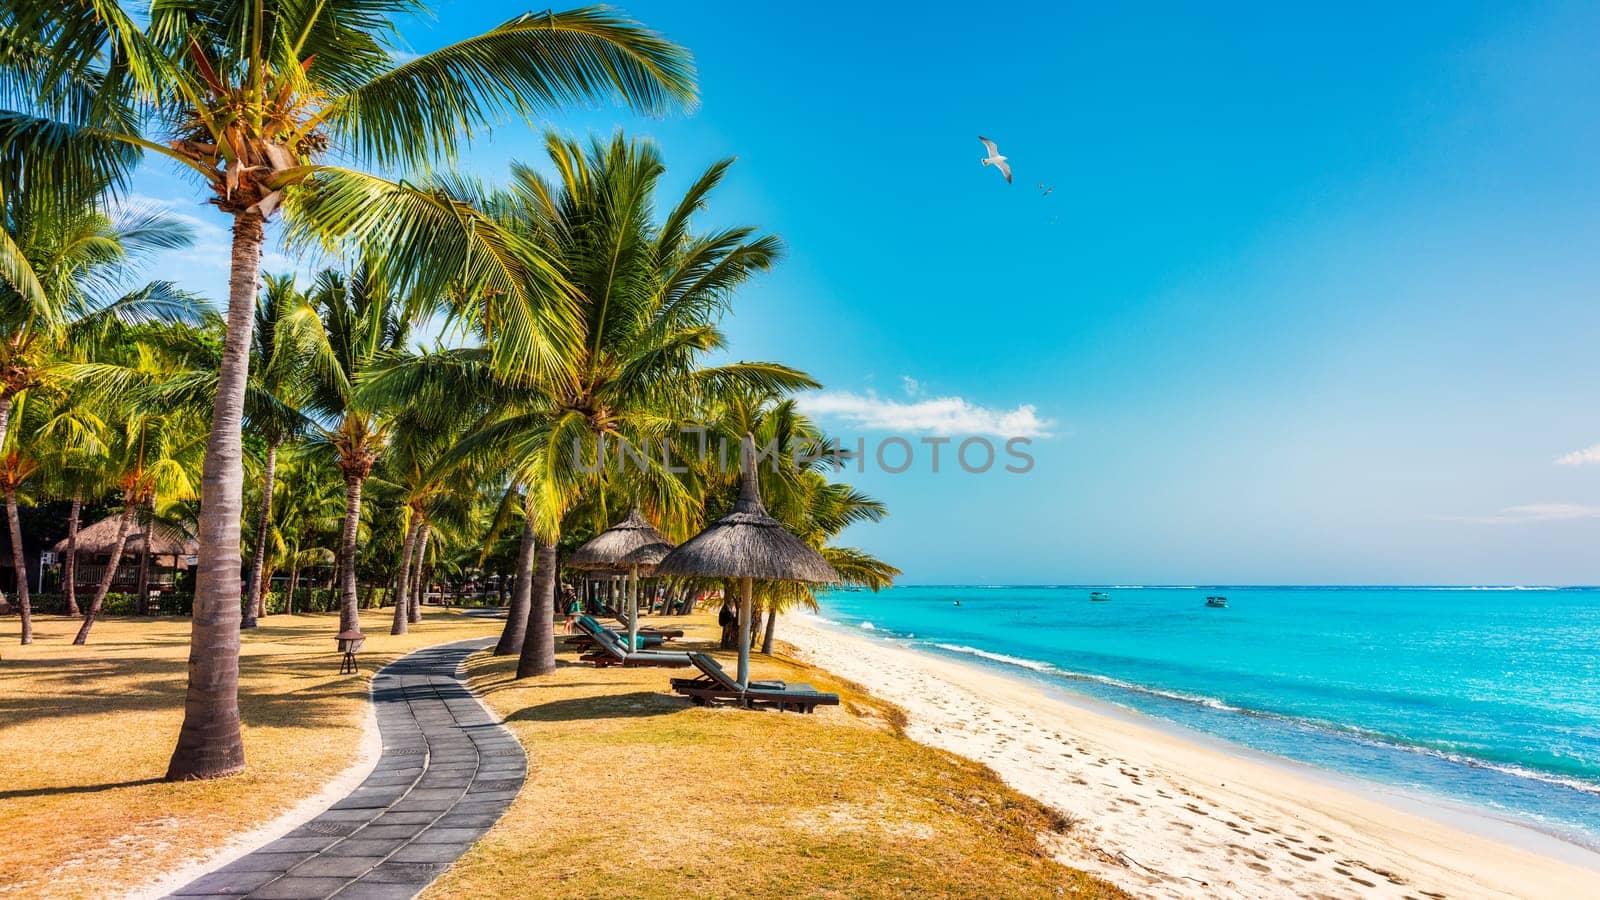 Palm trees on the tropical Le Morne beach, Mauritius. Tropical vacation background concept on Le Morne beach, Mauritius. Paradise beach on Mauritius island, palm trees, white sand, azure water.